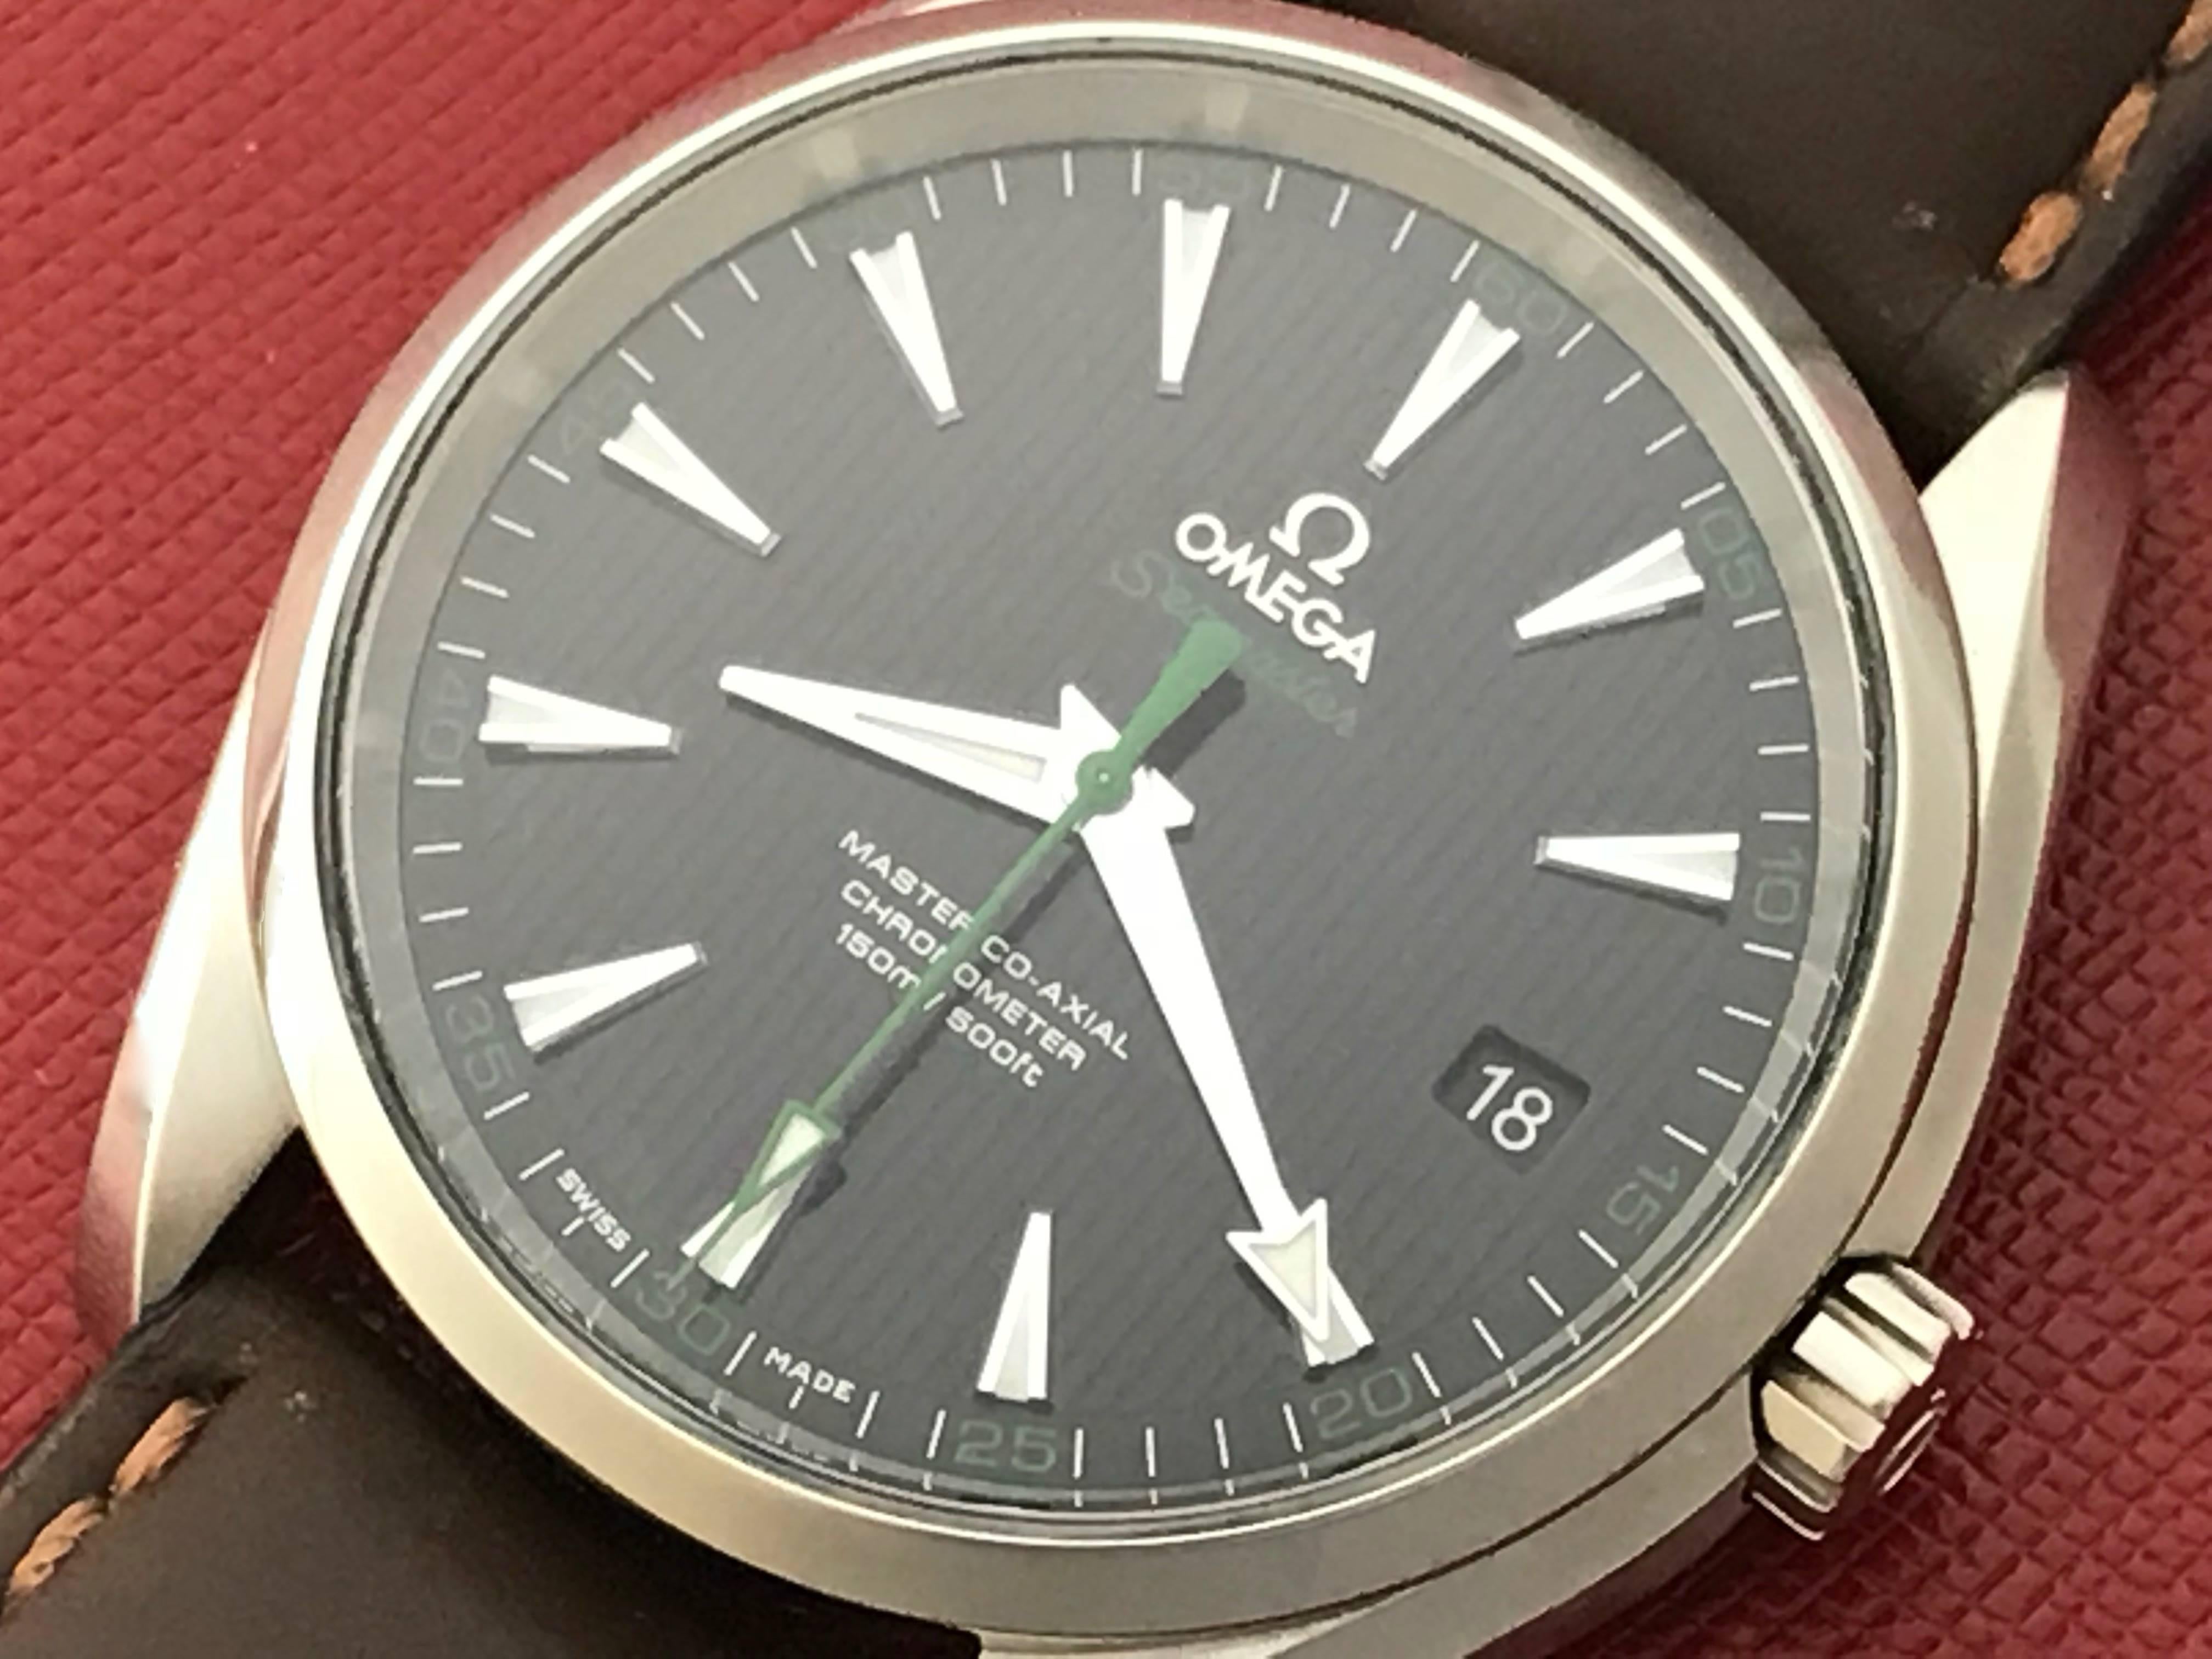 Omega Mens Seamaster Aqua Terra Ref 231.13.42.21.01.004 wrist watch, certified pre-owned and ready to ship.  Master Co-Axial - Omega In-House Automatic Winding Movement Caliber 8500 with date, and Approximate 60 Hour Power Reserve. Stainless Steel